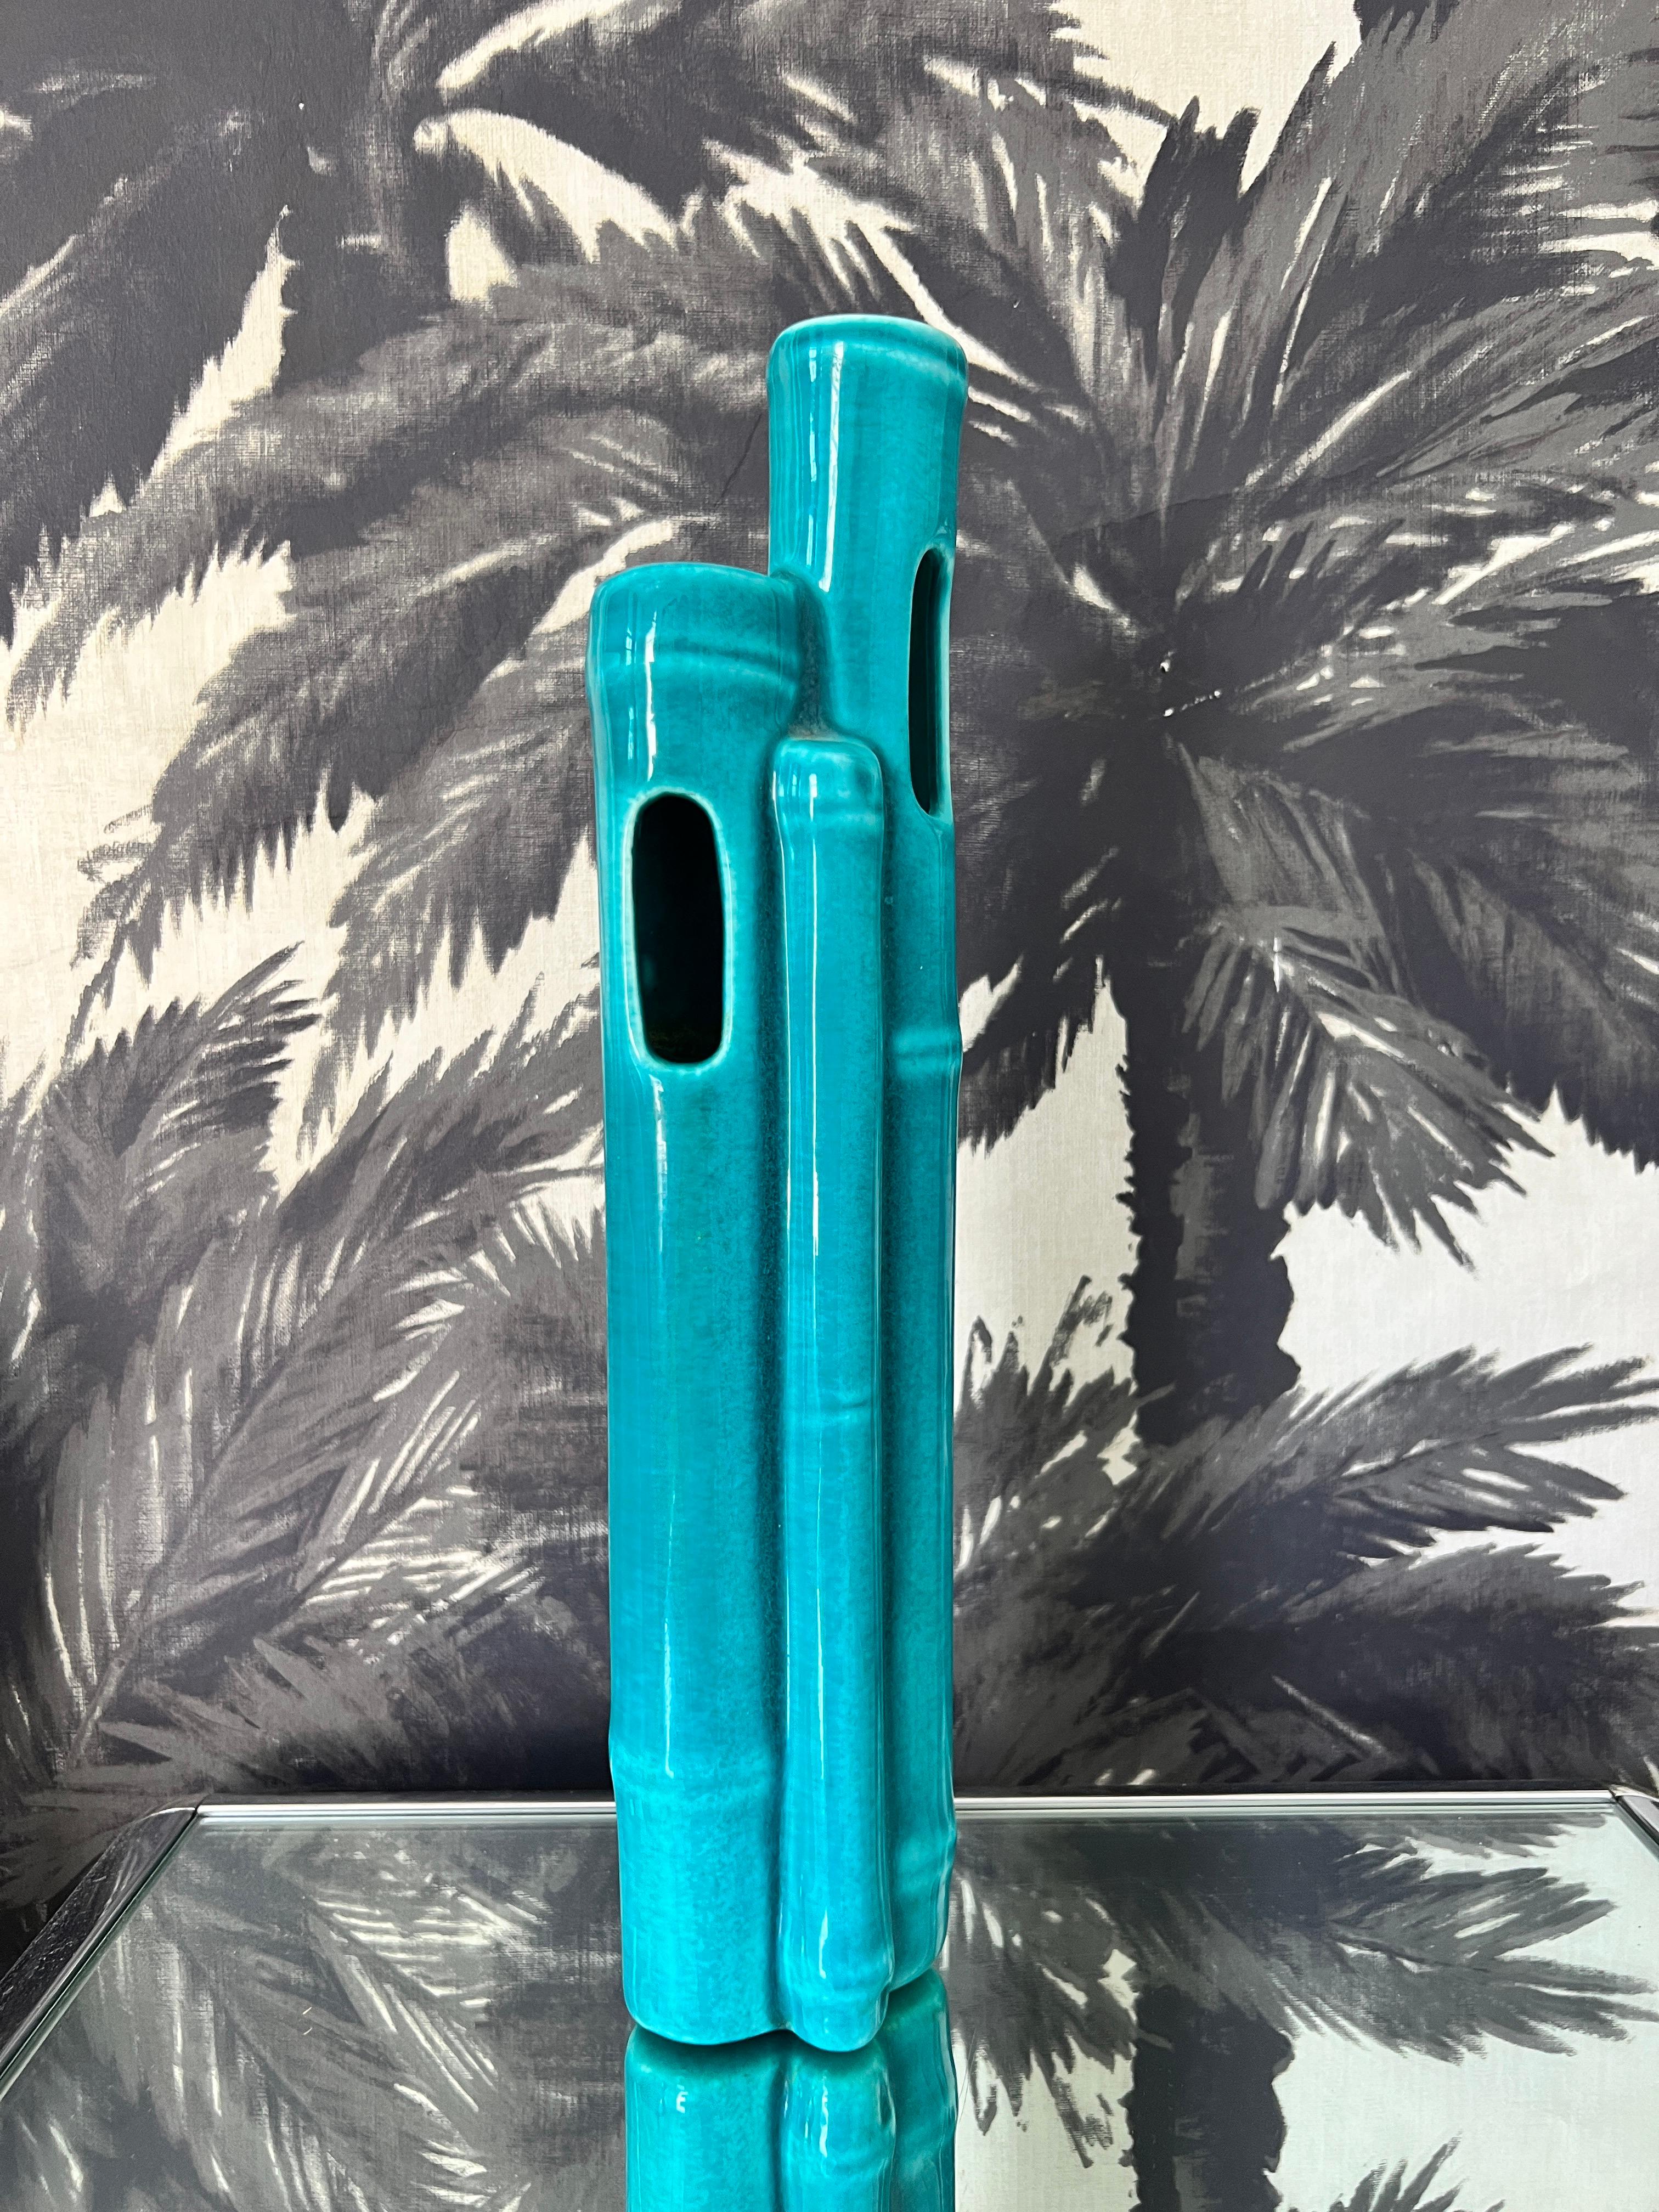 Ceramic Bamboo Wall Pocket Vase in Turquoise In Good Condition For Sale In Fort Lauderdale, FL